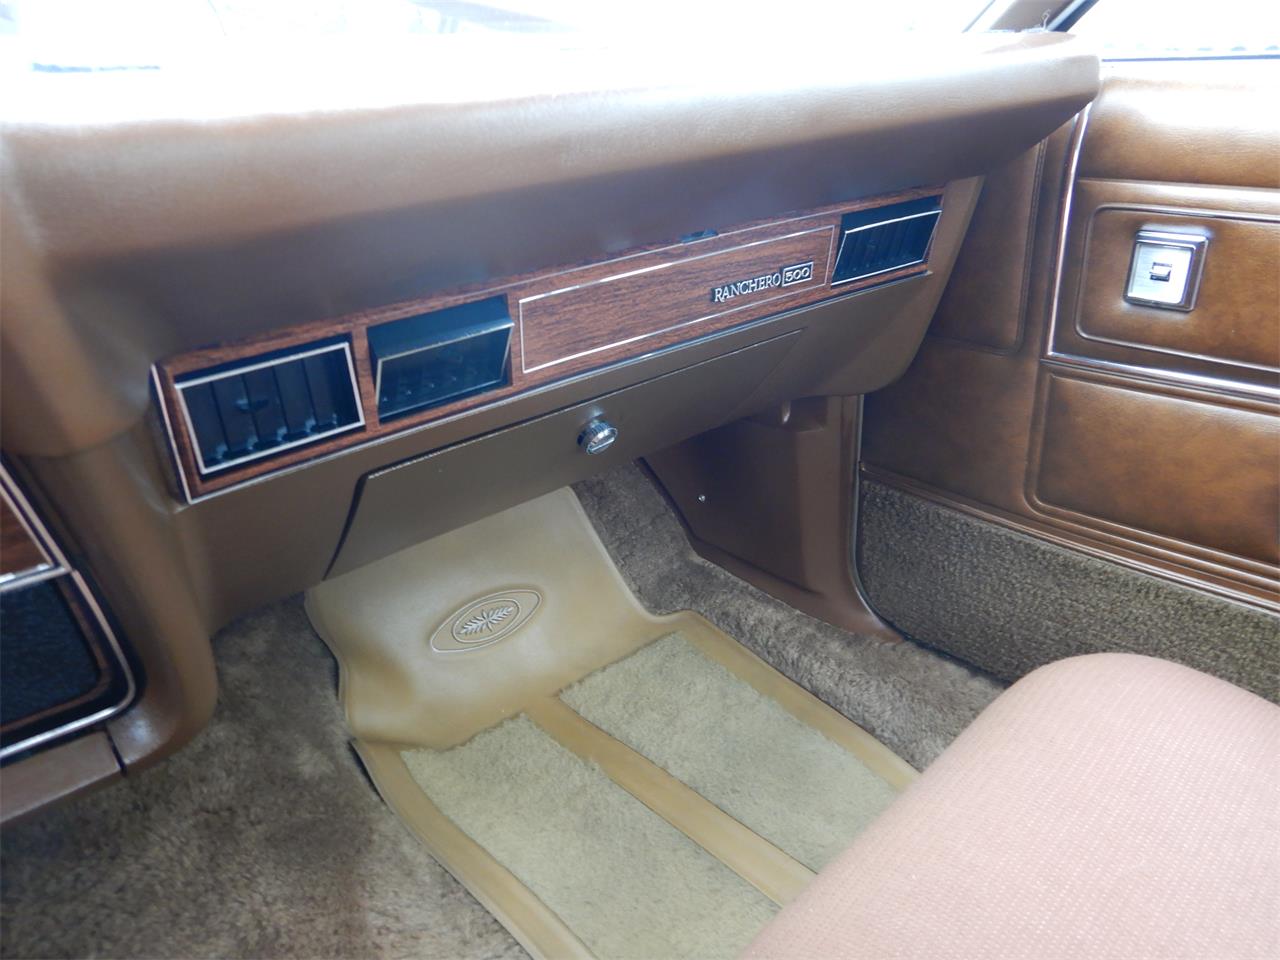 1978 Ford Ranchero for sale in Woodland Hills, CA – photo 46